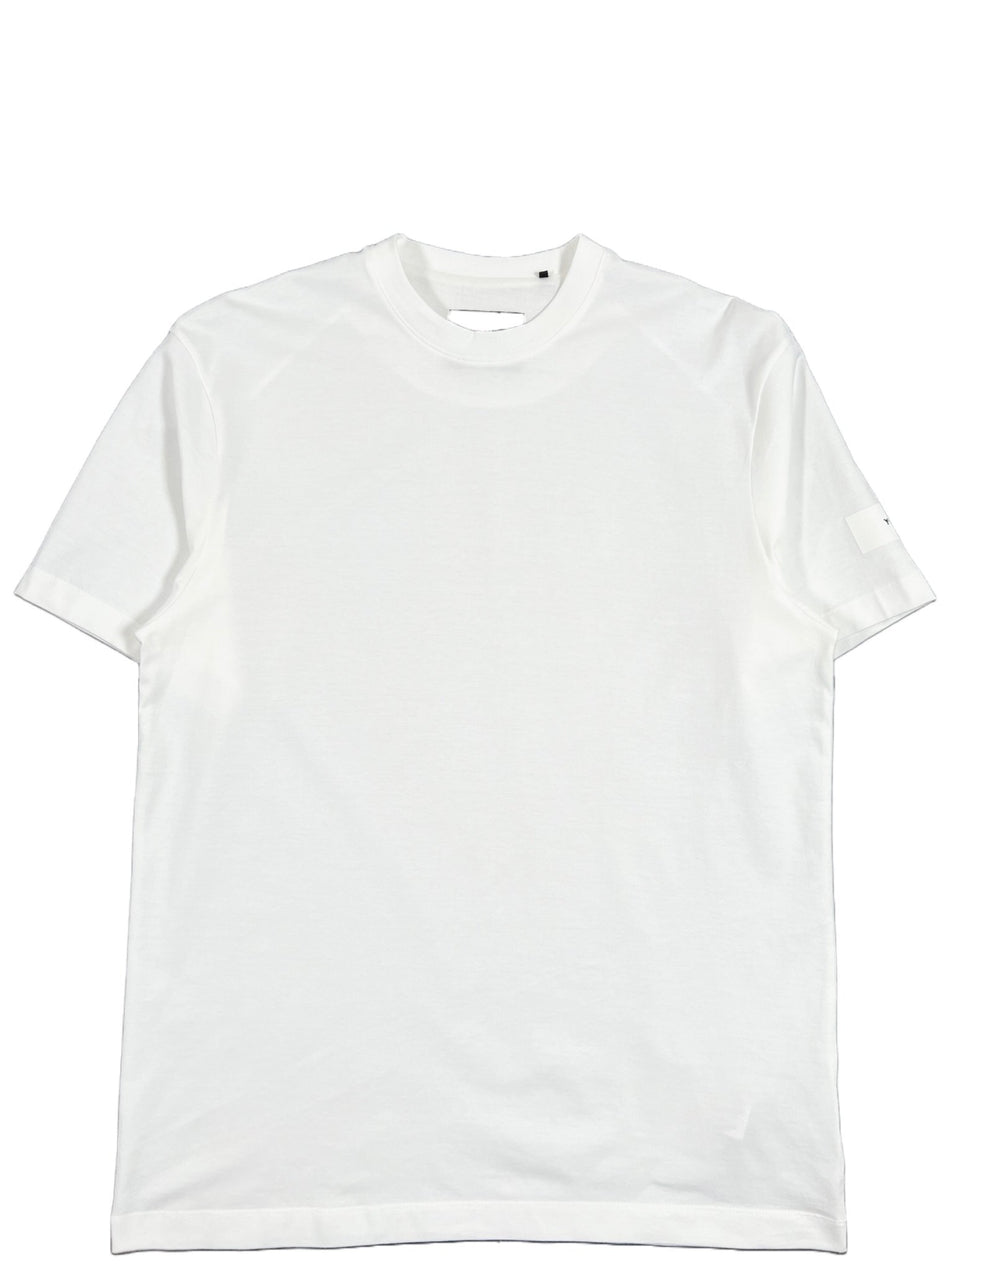 A white ADIDAS x Y-3 IB4787 RELAXED SS TEE CORE WHITE with logo detail on a white background.